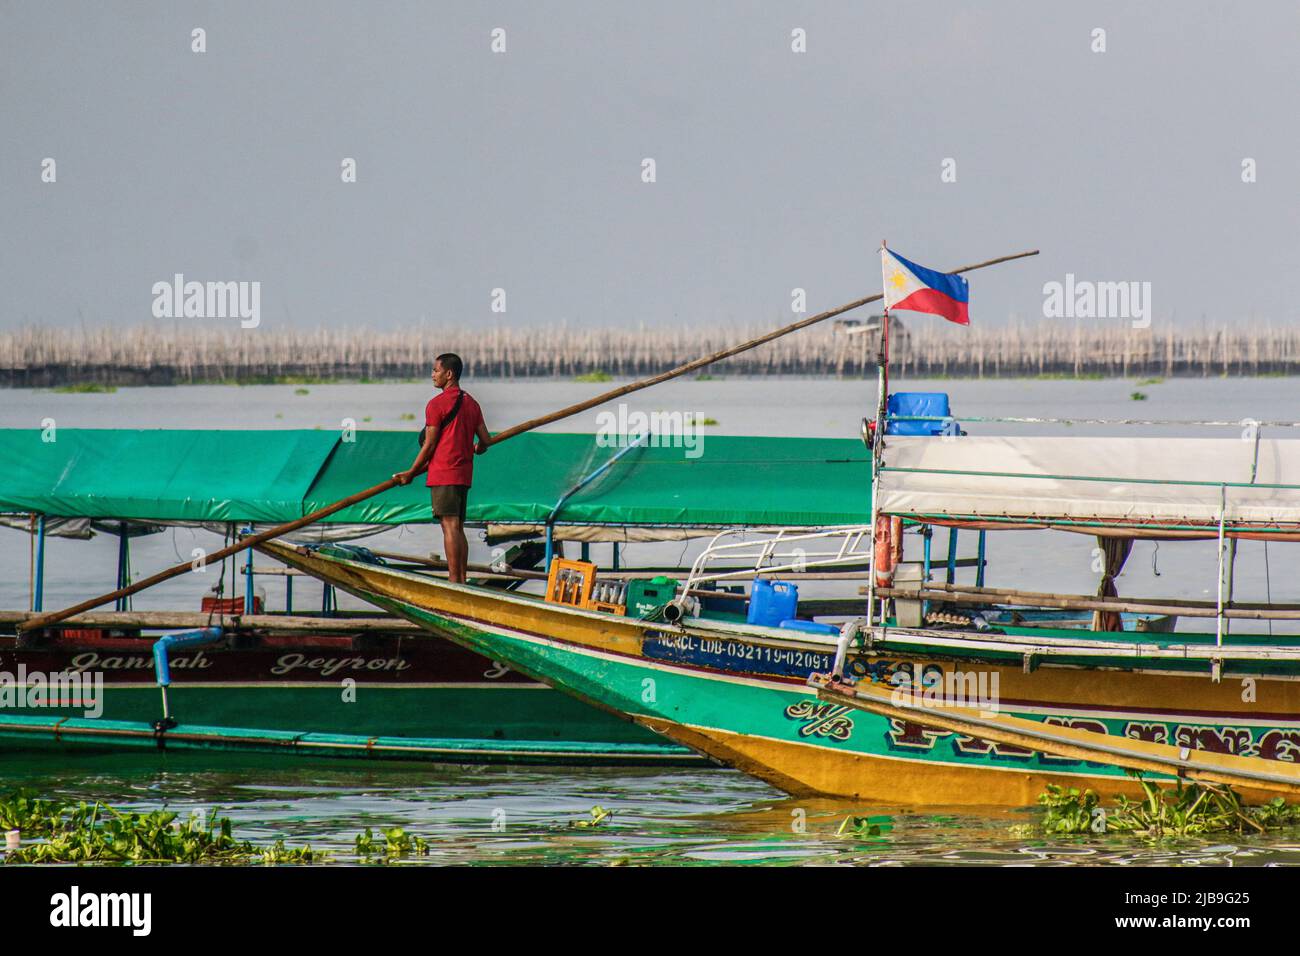 Binangonan, Philippines. 04th June, 2022. A fisherman anchors his boat in the lake. Laguna Lake is the largest lake in the Philippines, covering a surface of 900 square kilometers or equivalent to 90,000 hectares. Its water runs from Laguna Province all the way to the Province of Rizal, the southern part of Luzon. The lake provides resources like transportation, recreation, livelihood, and most importantly food for the surrounding communities. Laguna Lake is classified as Class C freshwater which has the capability to grow fish and other aquatic resources. Some watershed near Metro Manila clas Stock Photo